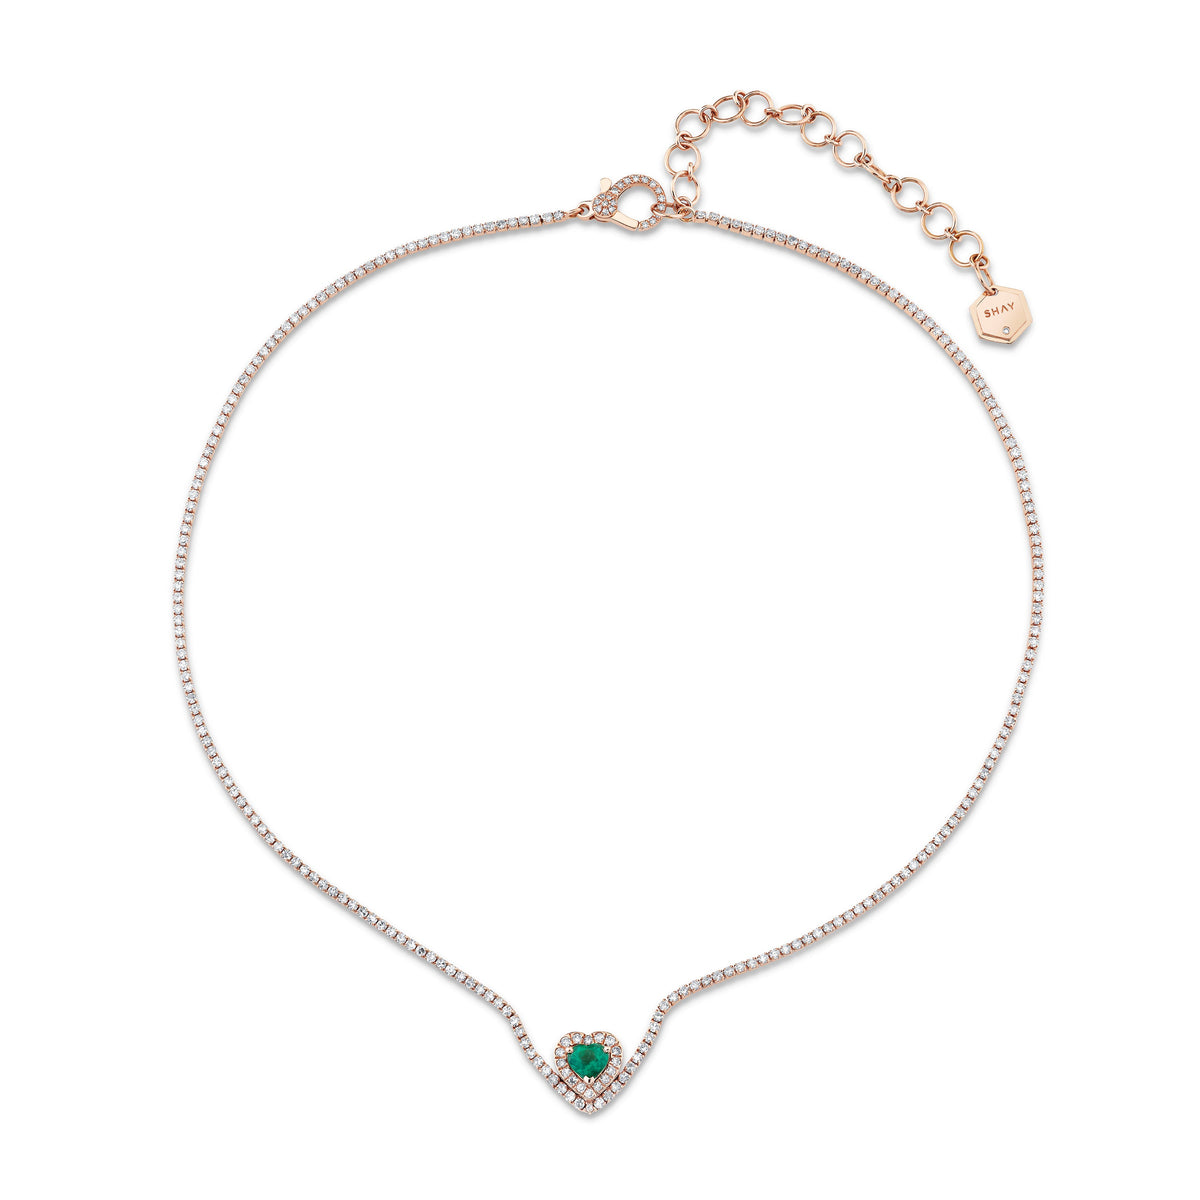 READY TO SHIP EMERALD & DIAMOND FLOATING HEART PAVE THREAD NECKLACE